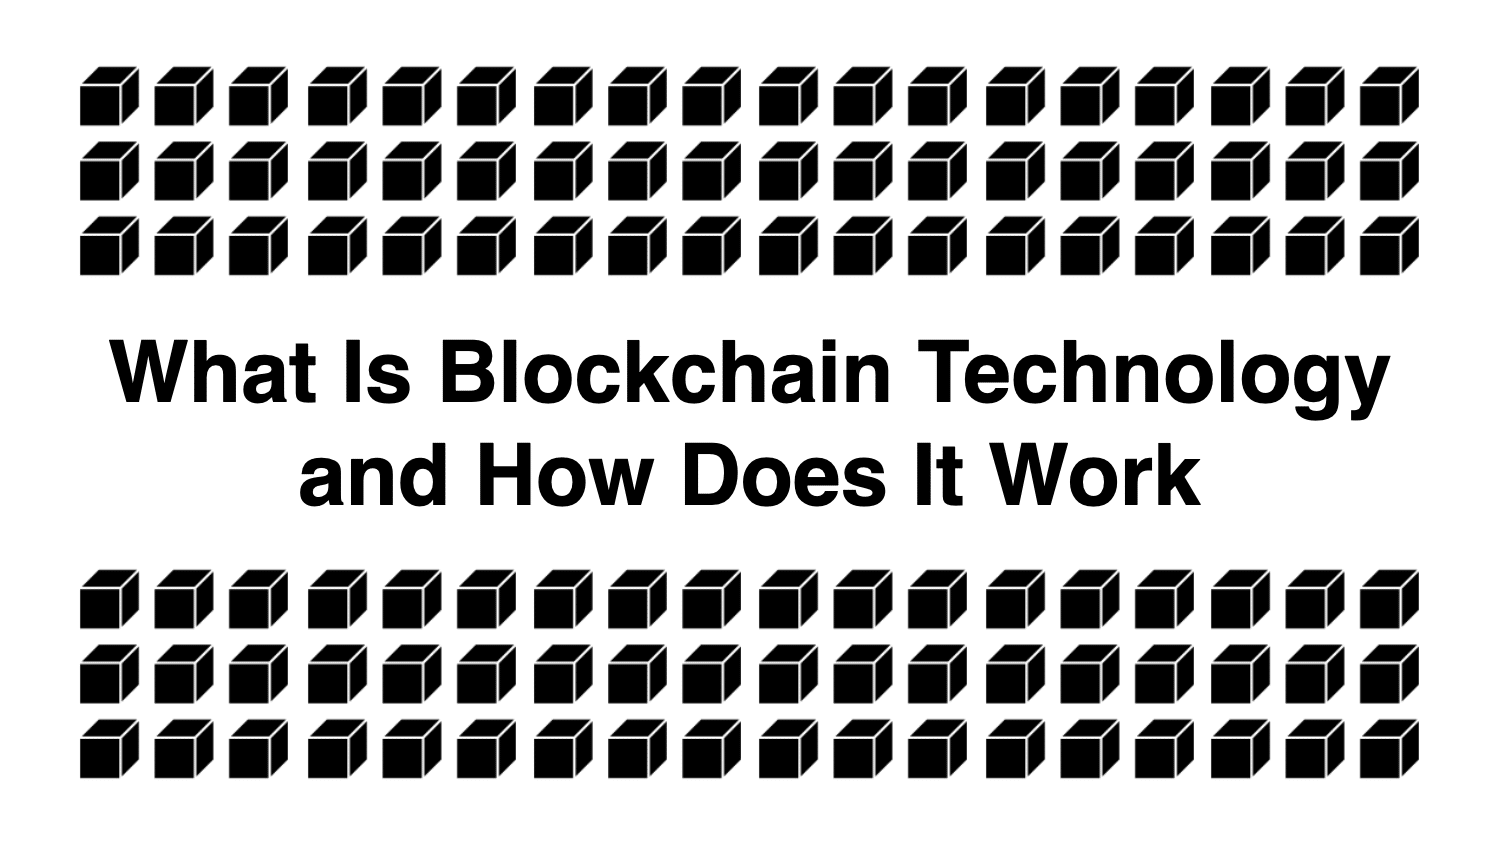 What is Blockchain Technology and How Does it Work?